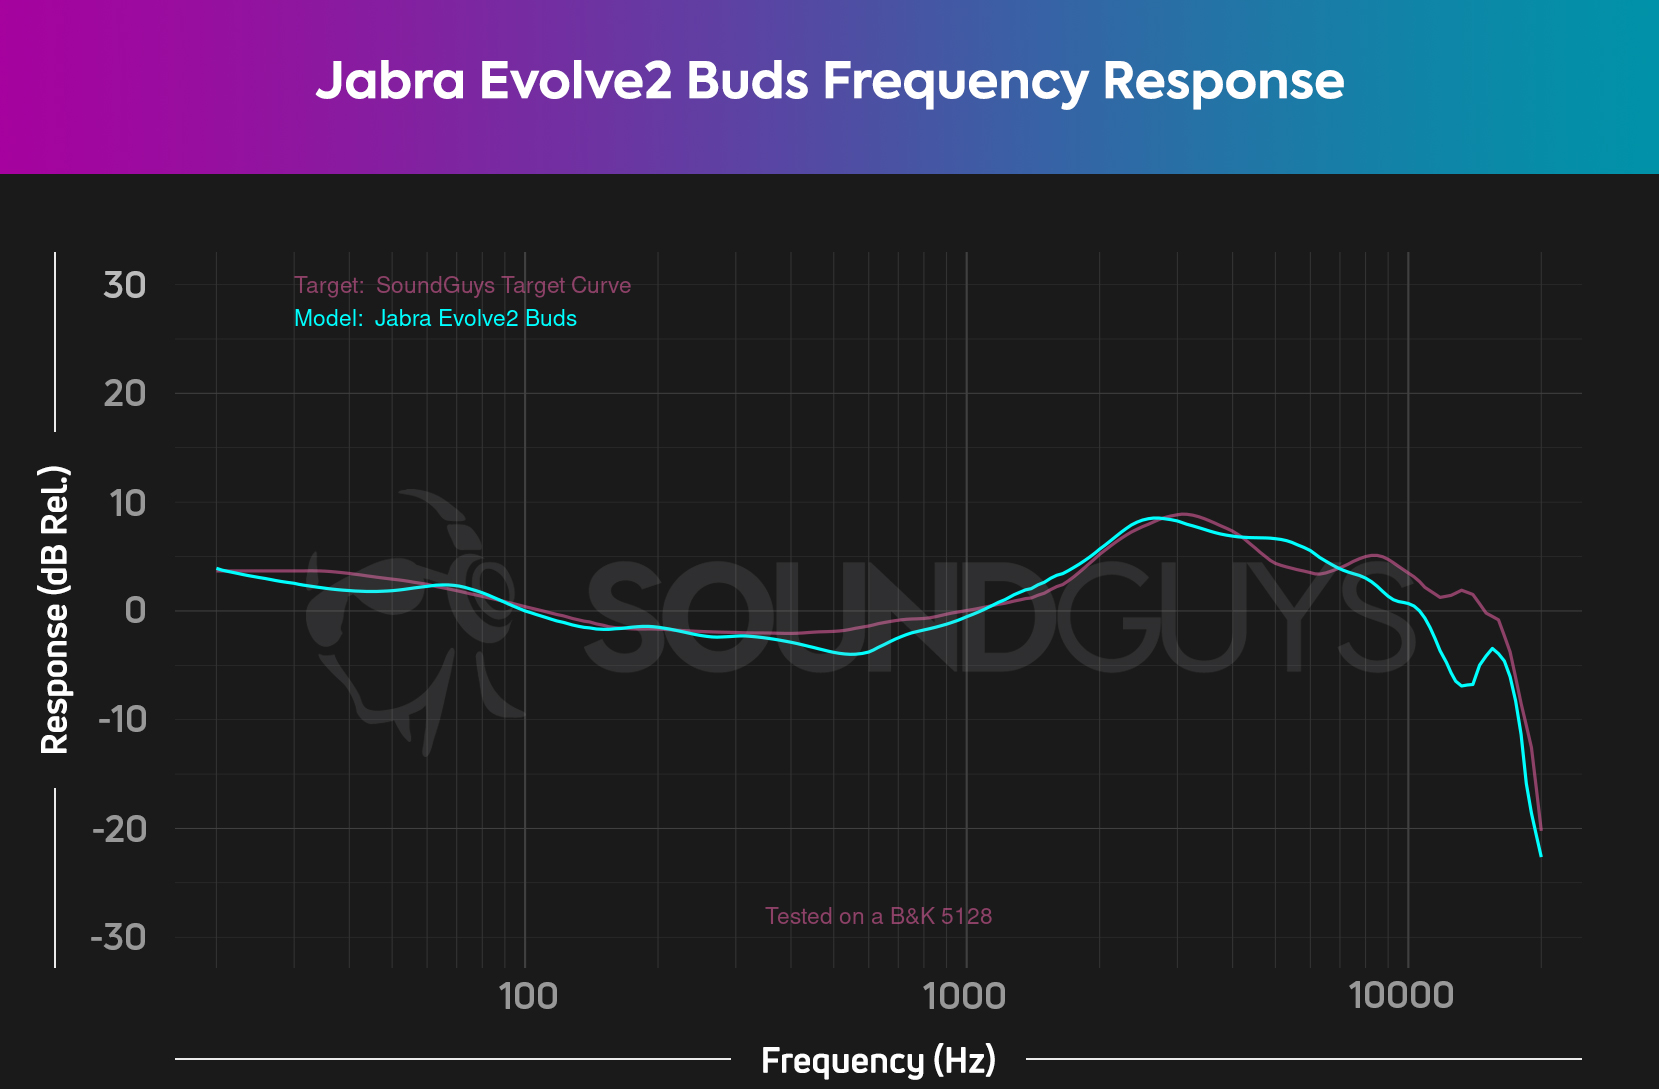 A frequency response chart traces the Jabra Evolve2 Buds and our target curve for comparison.